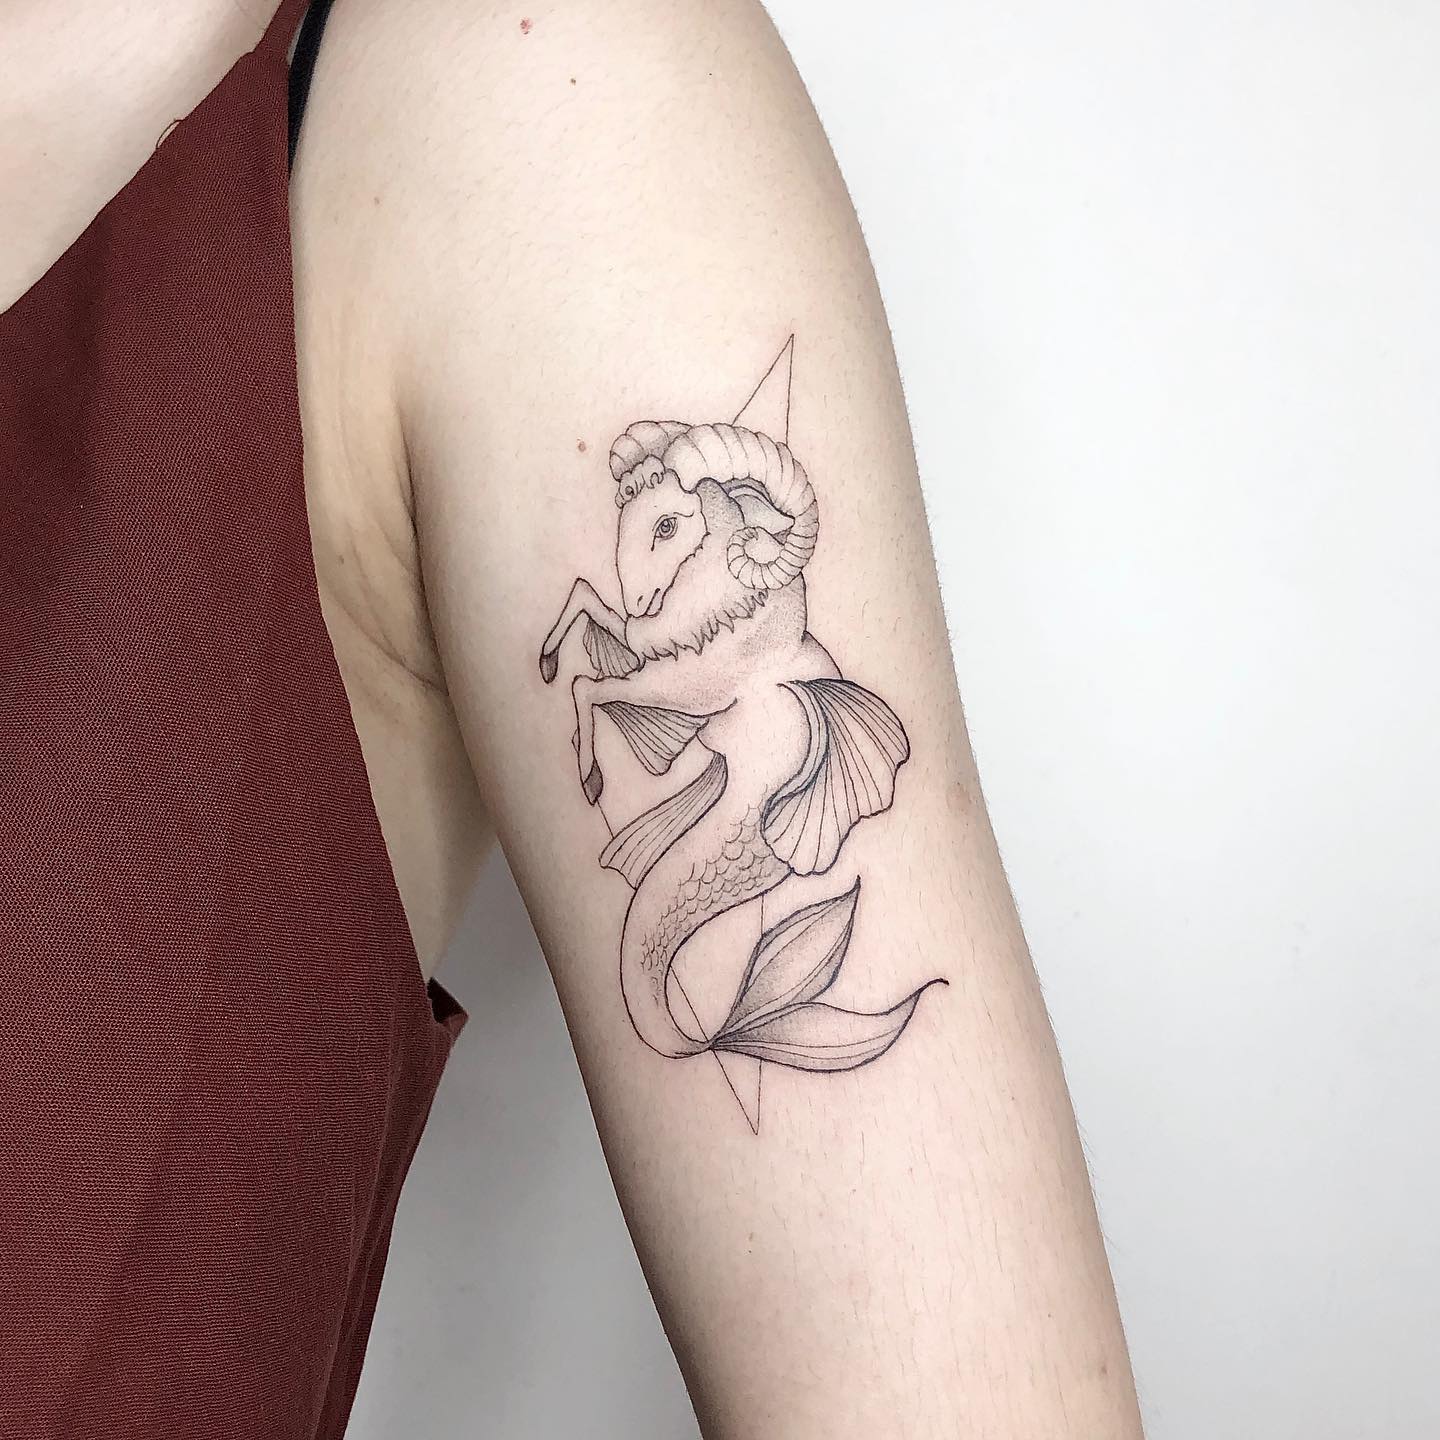 Sea goat tattoo located on the upper arm